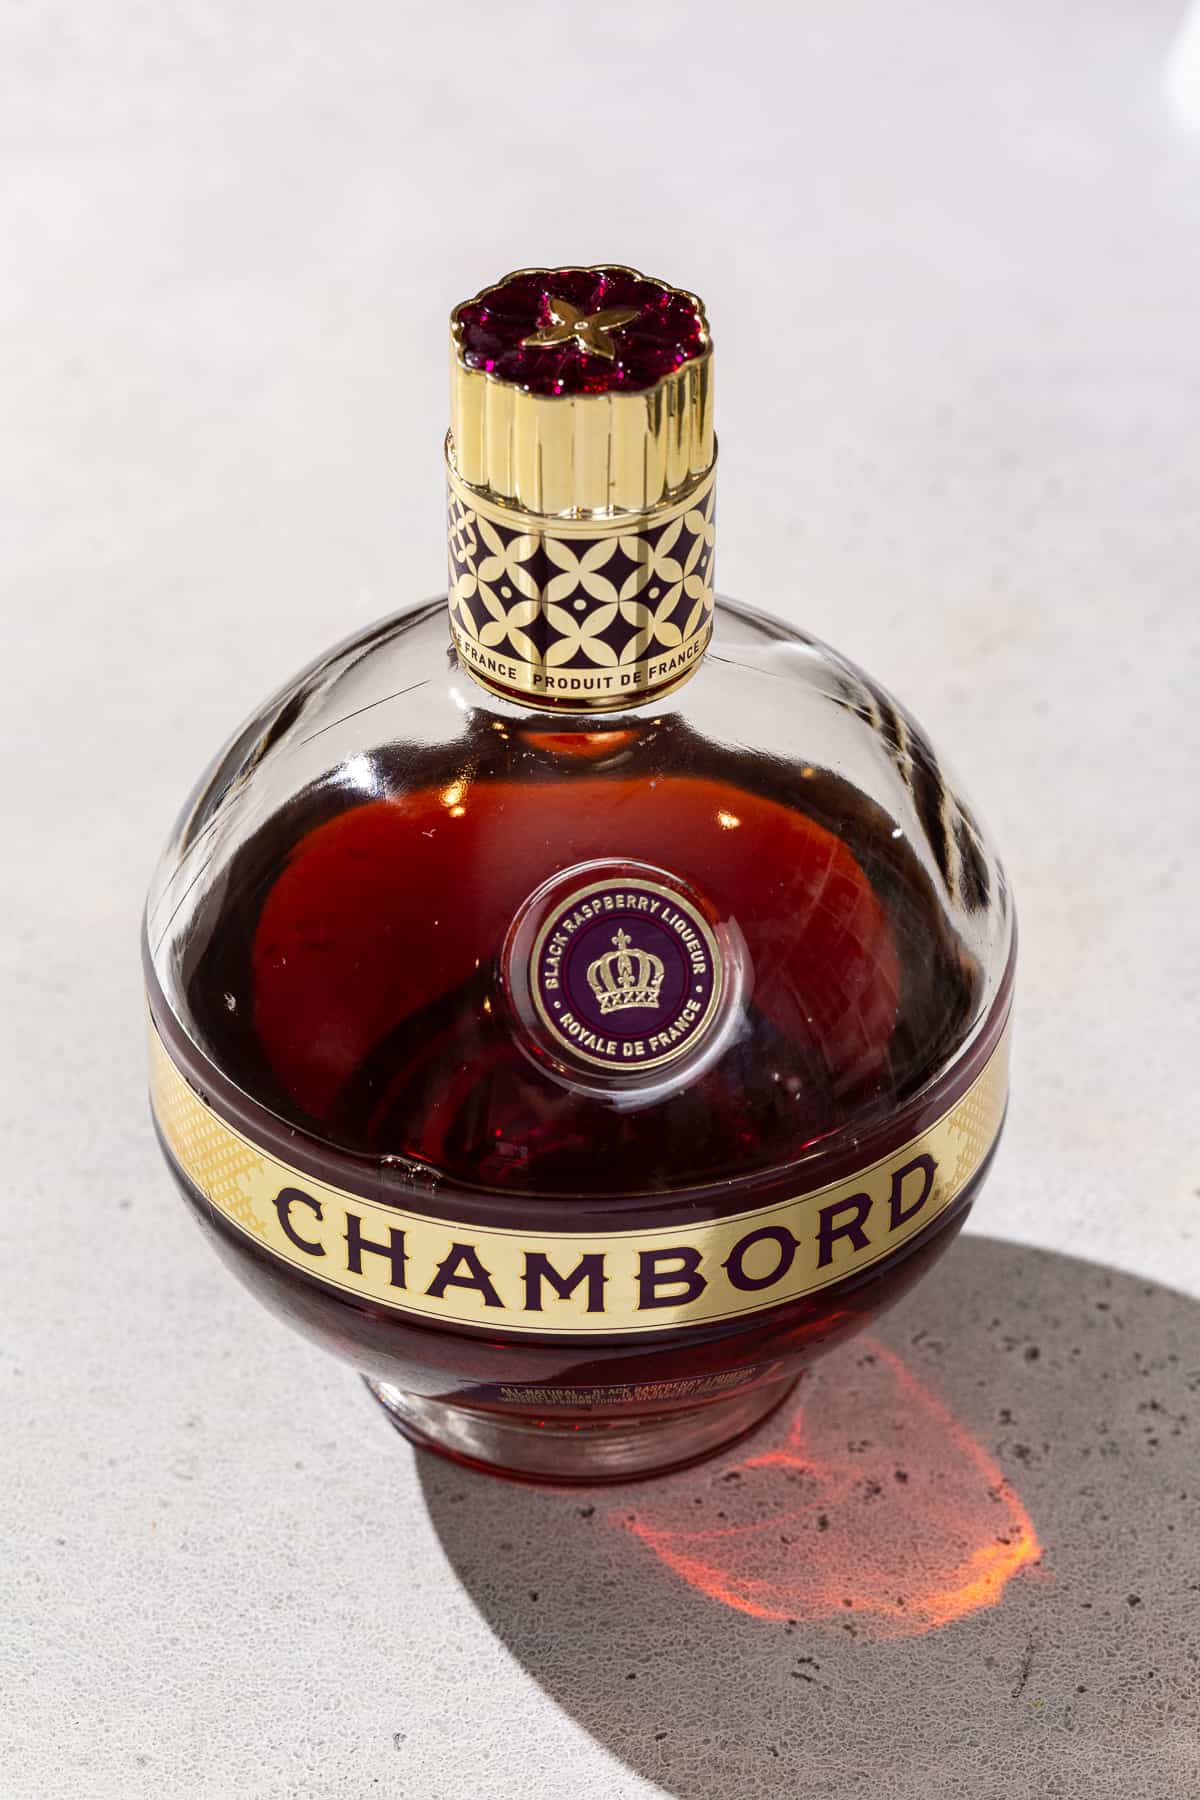 A bottle of Chambord liqueur on a countertop. The bottle has a distinctive round shape with a gold band around the middle and a gold screw top cap.